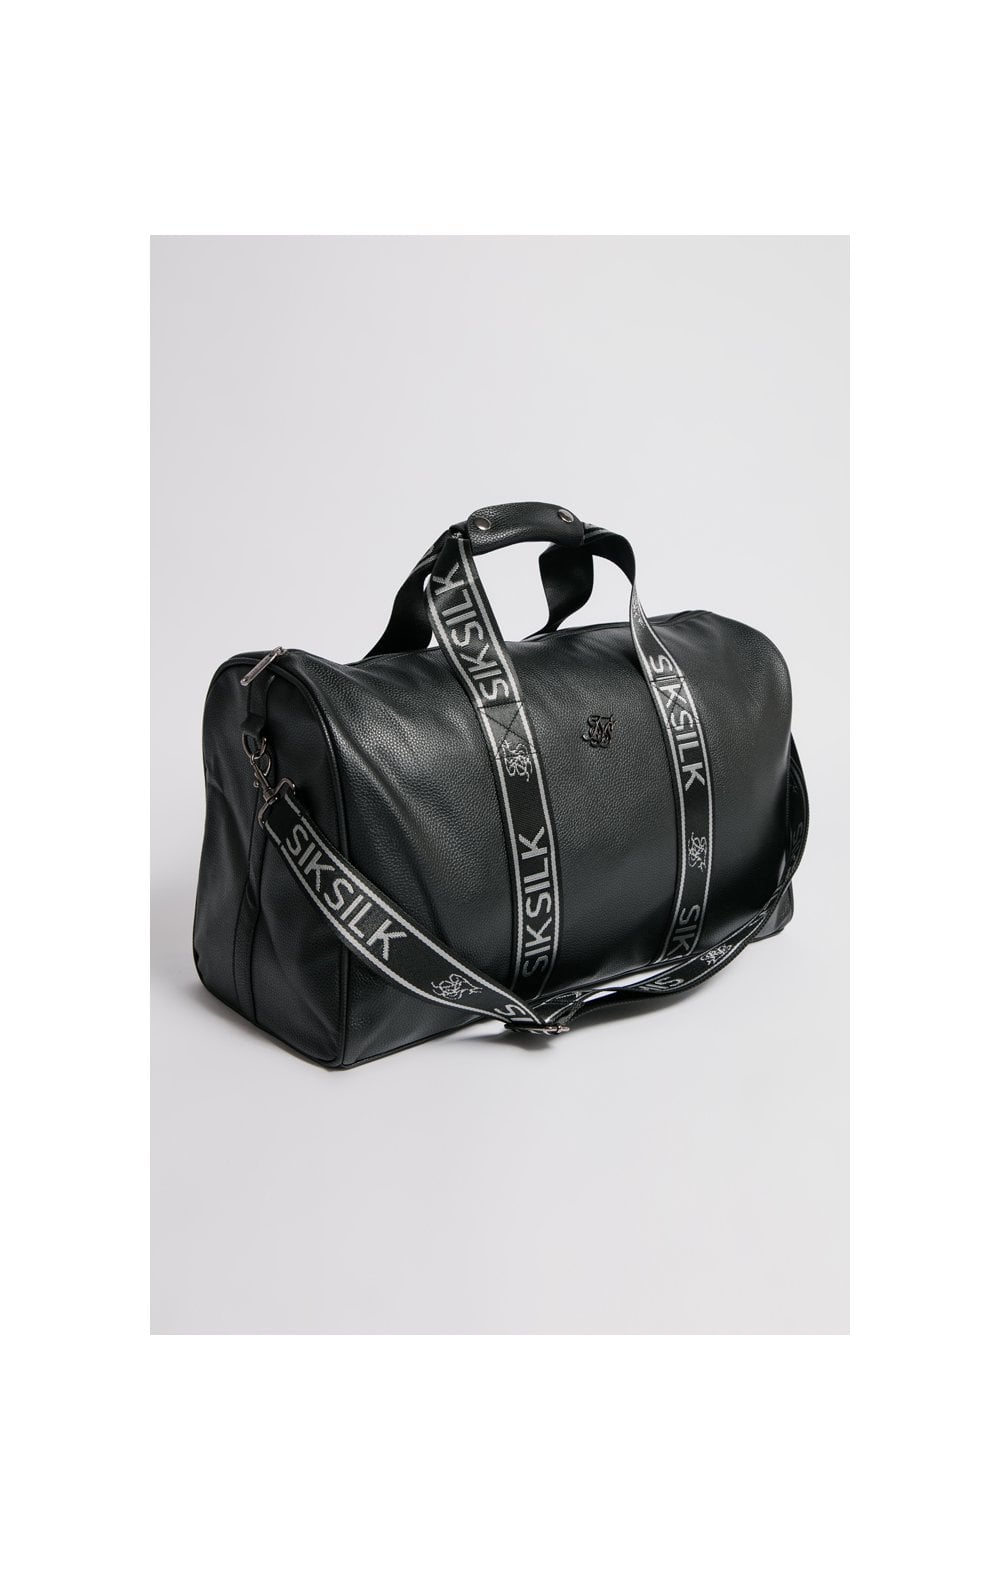 Load image into Gallery viewer, SikSilk Tape Travel Bag - Black (8)